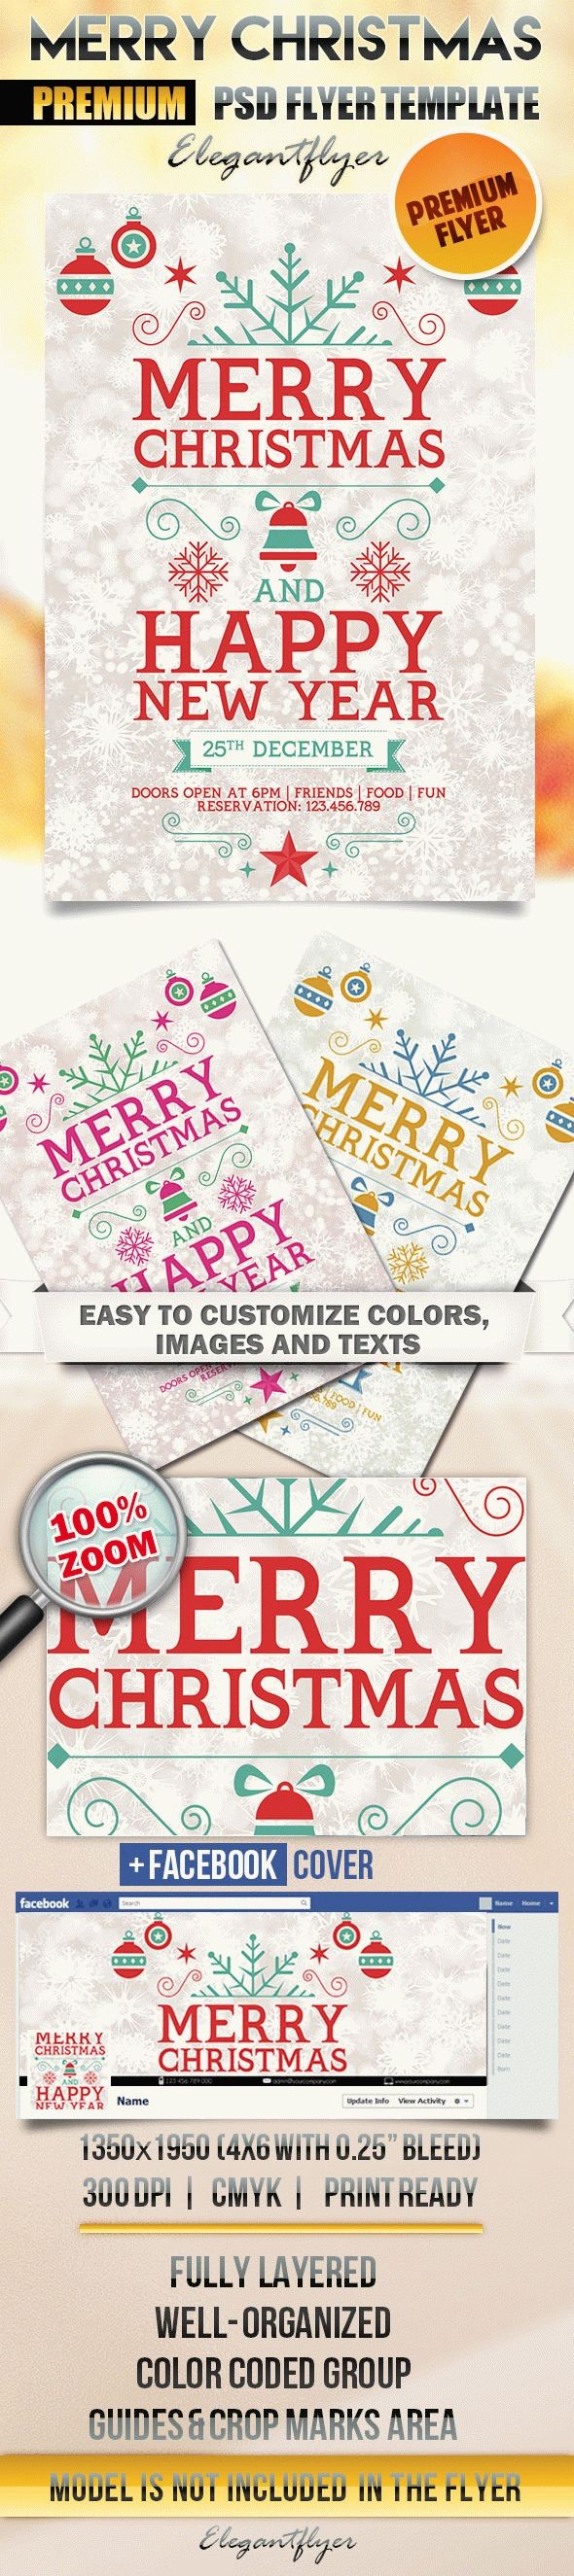 White Illustrated Merry Merry Christmas Premium Flyer Template PSD | by ...